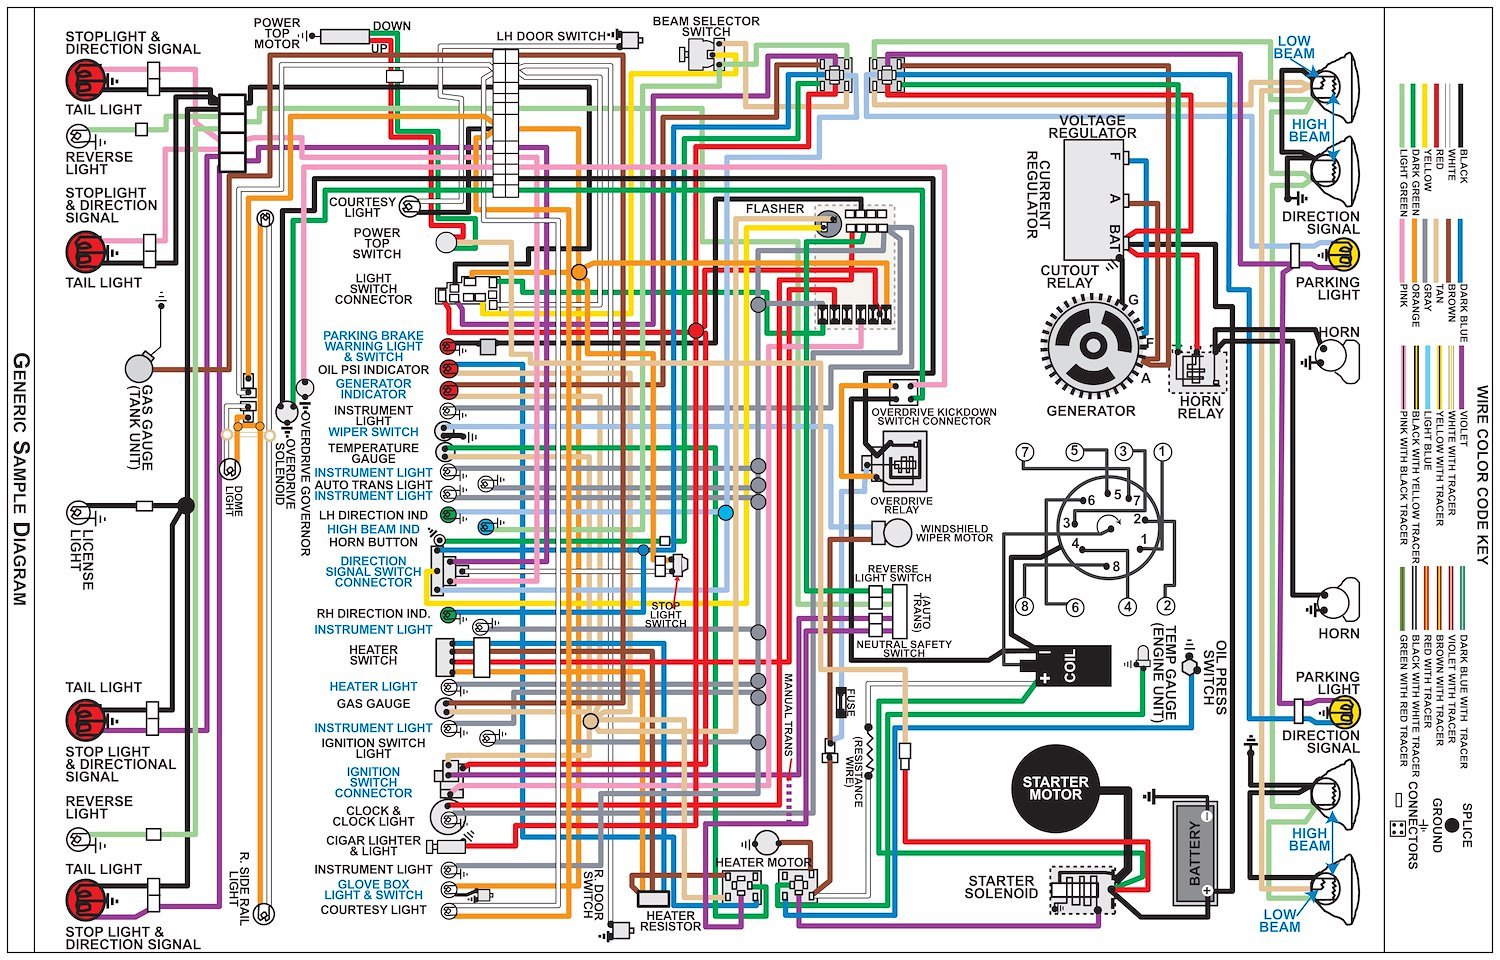 Wiring Diagram for 1972 Ford F-Series Truck, 11 in x 17 in., Laminated